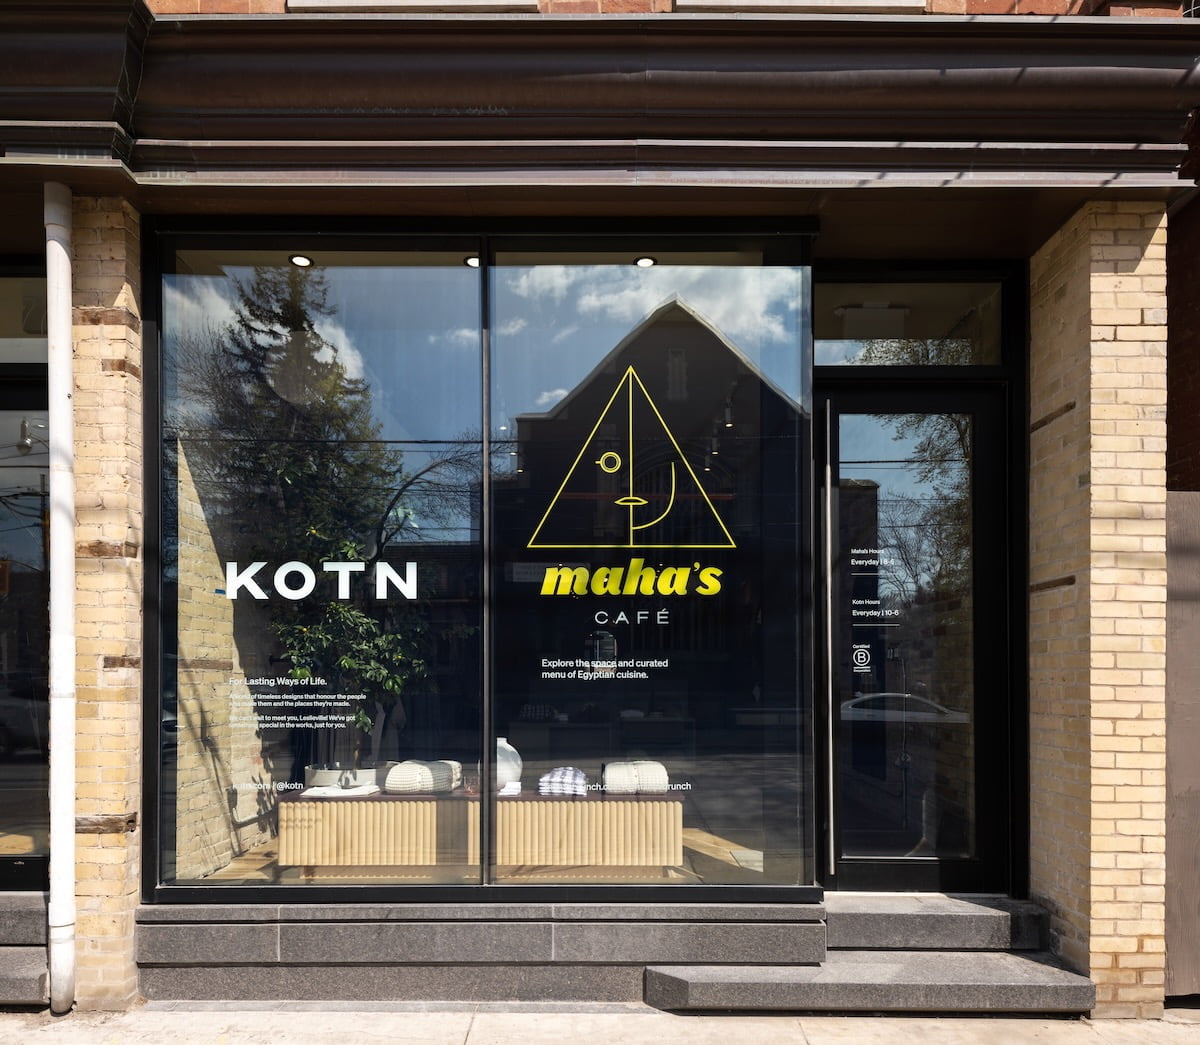 Fashion Brand 'Kotn' Continues Canadian Retail Expansion with 5th Store ...